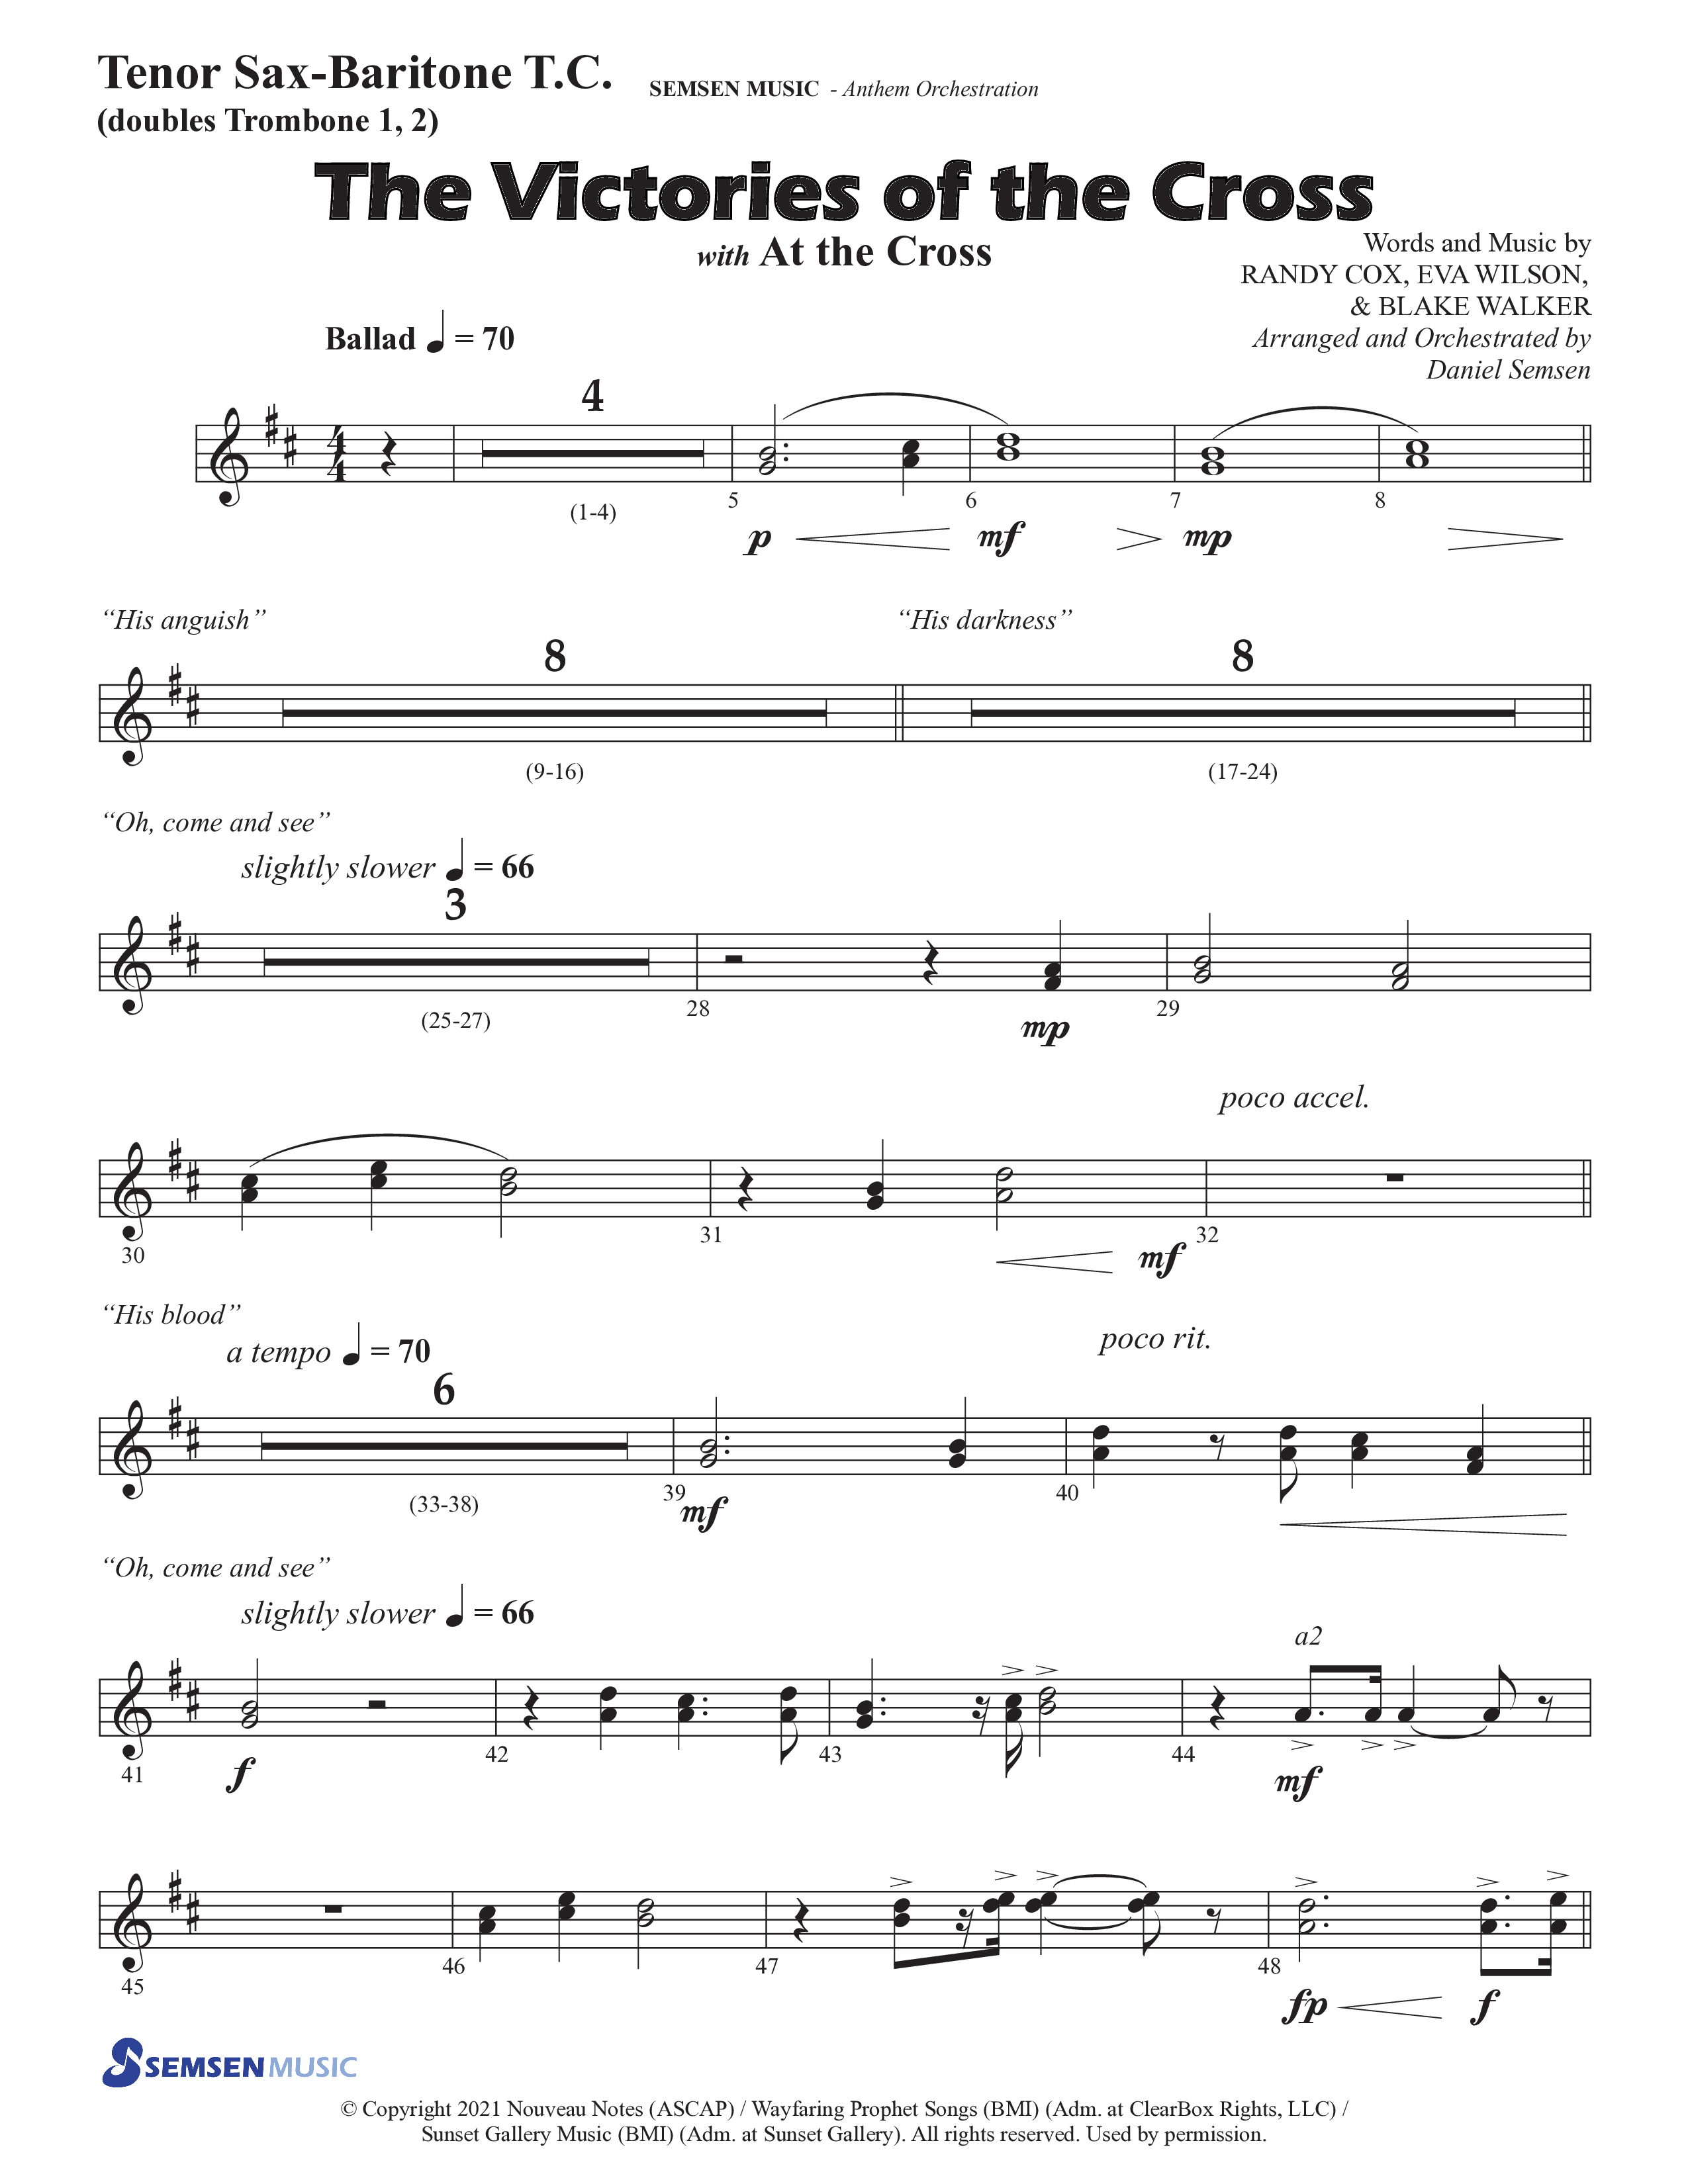 The Victories Of The Cross (with At The Cross) (Choral Anthem SATB) Tenor Sax/Baritone T.C. (Semsen Music / Arr. Daniel Semsen)